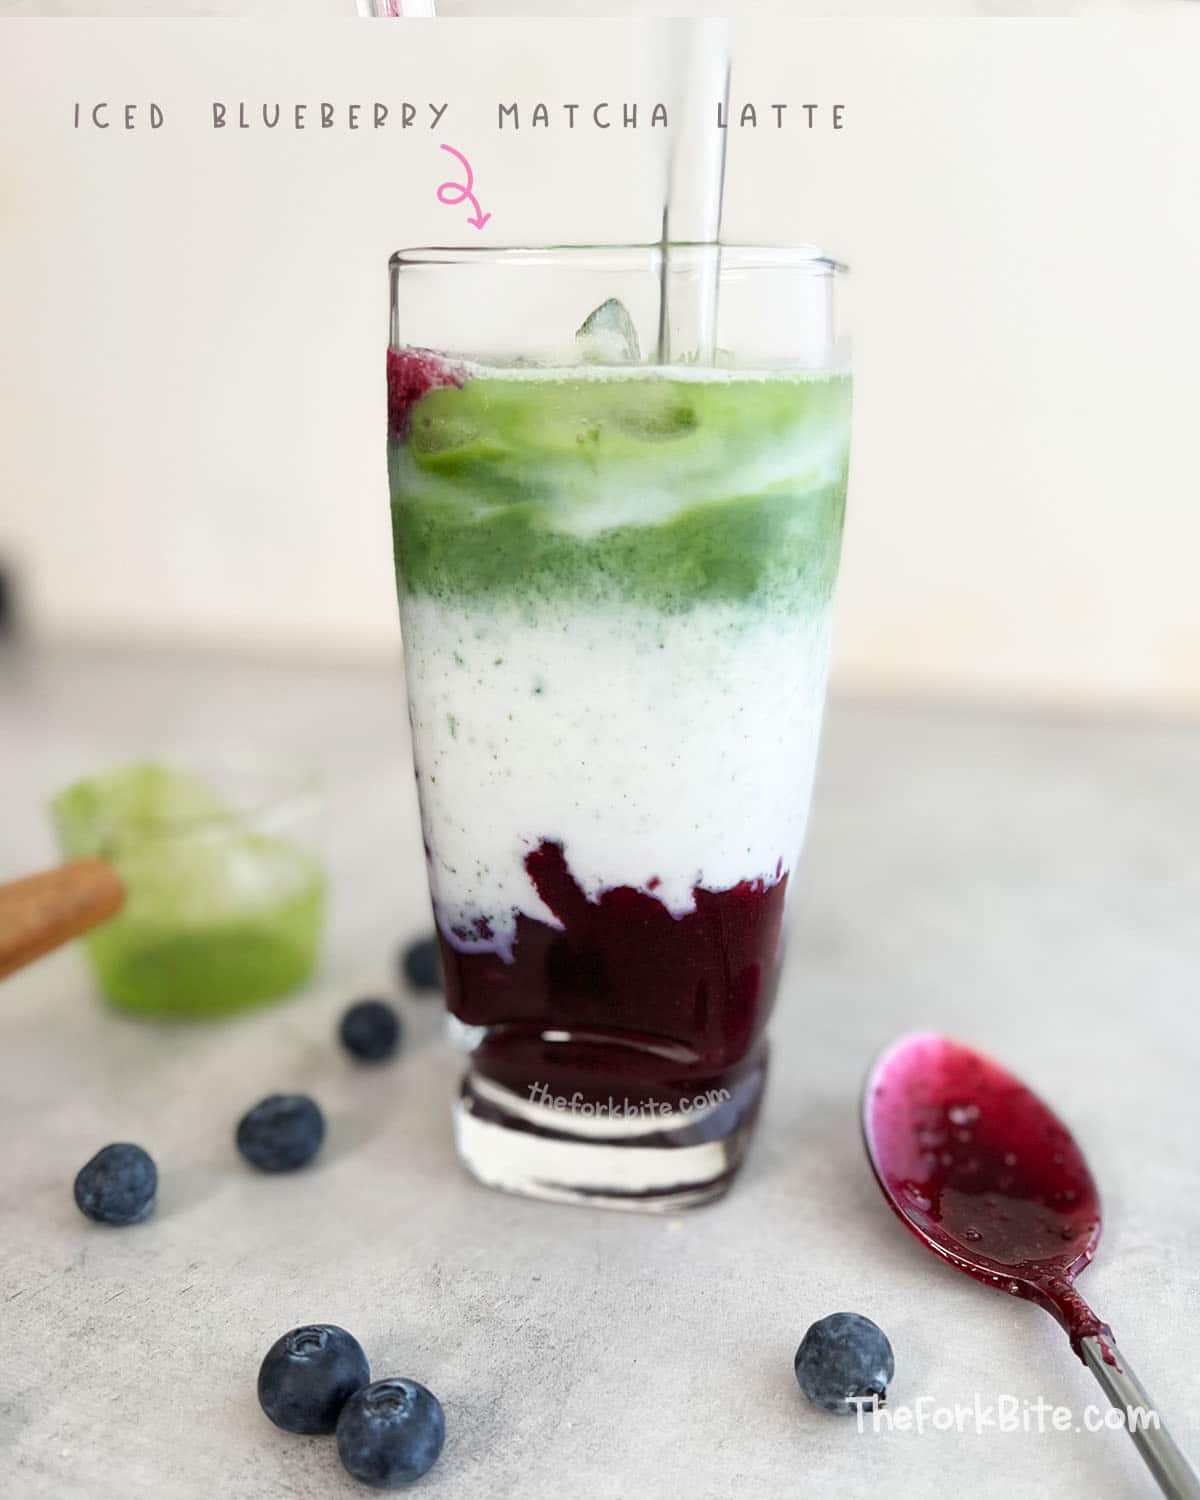 This Iced Blueberry Matcha Latte is a sweet and creamy drink that you can make in under 1 minute for less than one dollar! It's perfect for an afternoon pick me up or beat the summer heat.